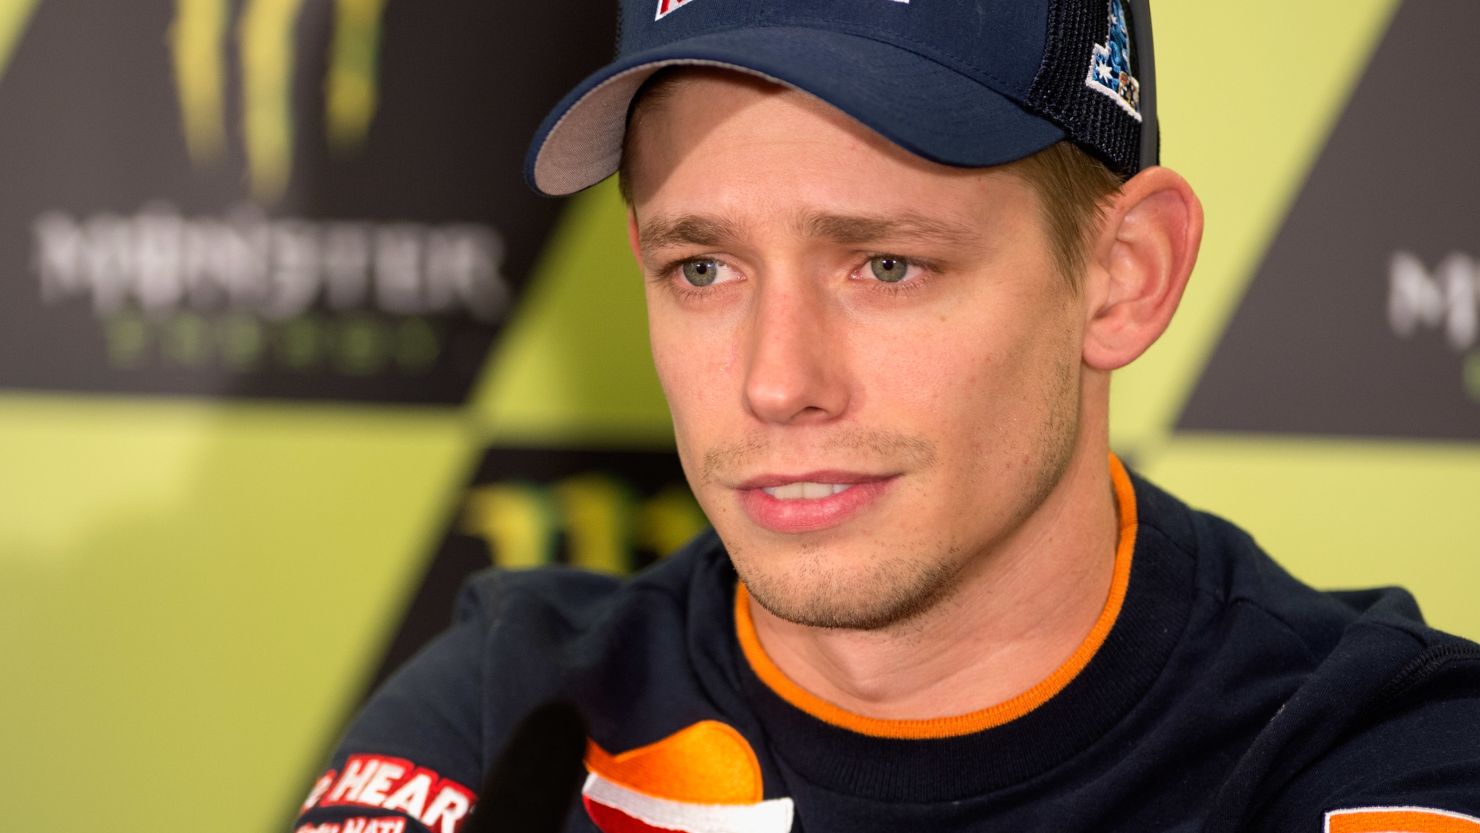 Australia's Casey Stoner will be driving a V8 sports car in 2013 following his retirement from MotoGP.
